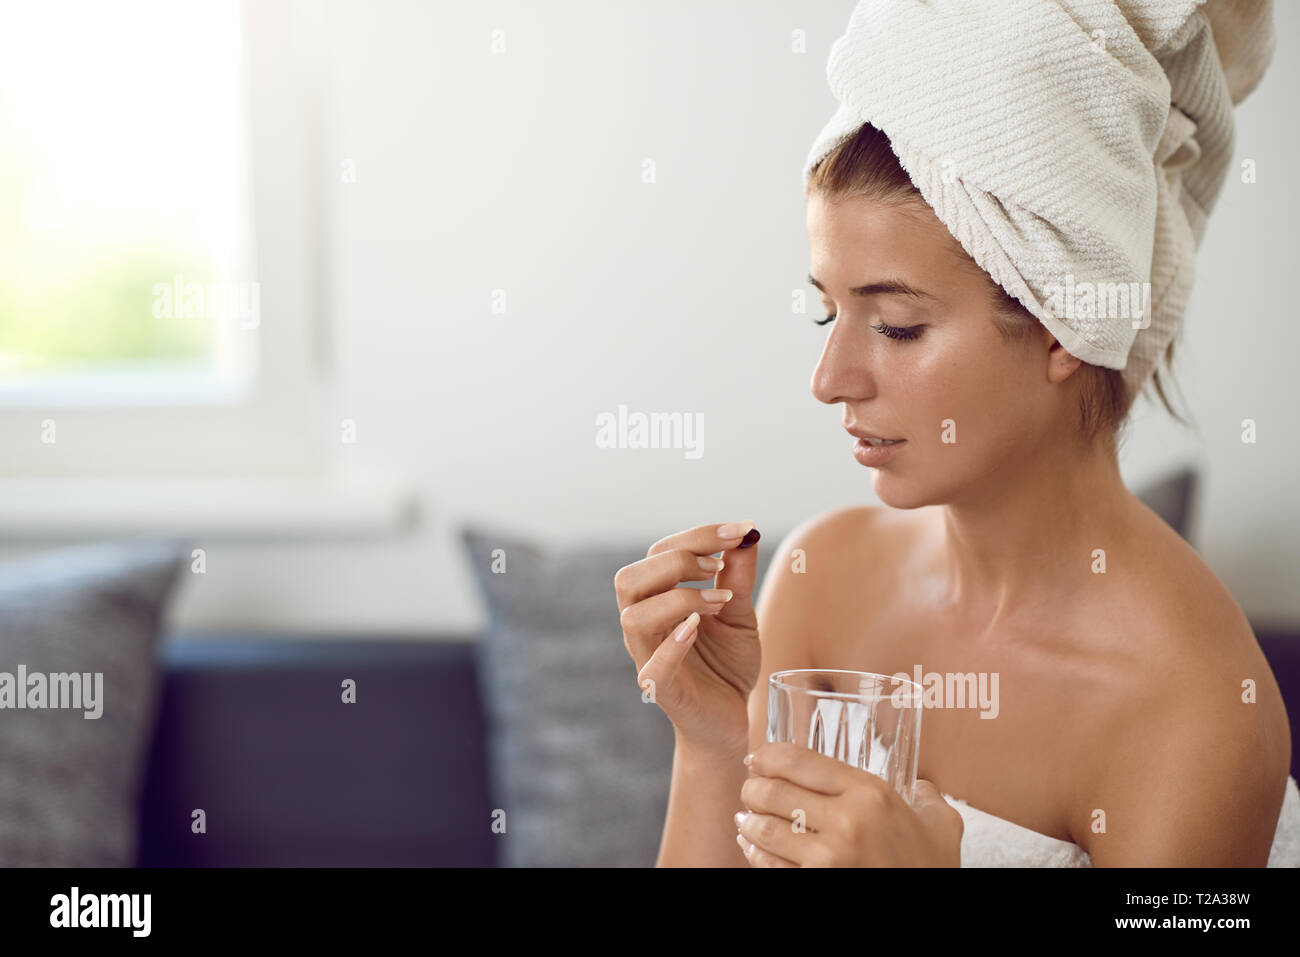 Attractive young woman with her hair and body wrapped in white towels after bathing or spa treatment taking a tablet or dietary supplement holding a g Stock Photo